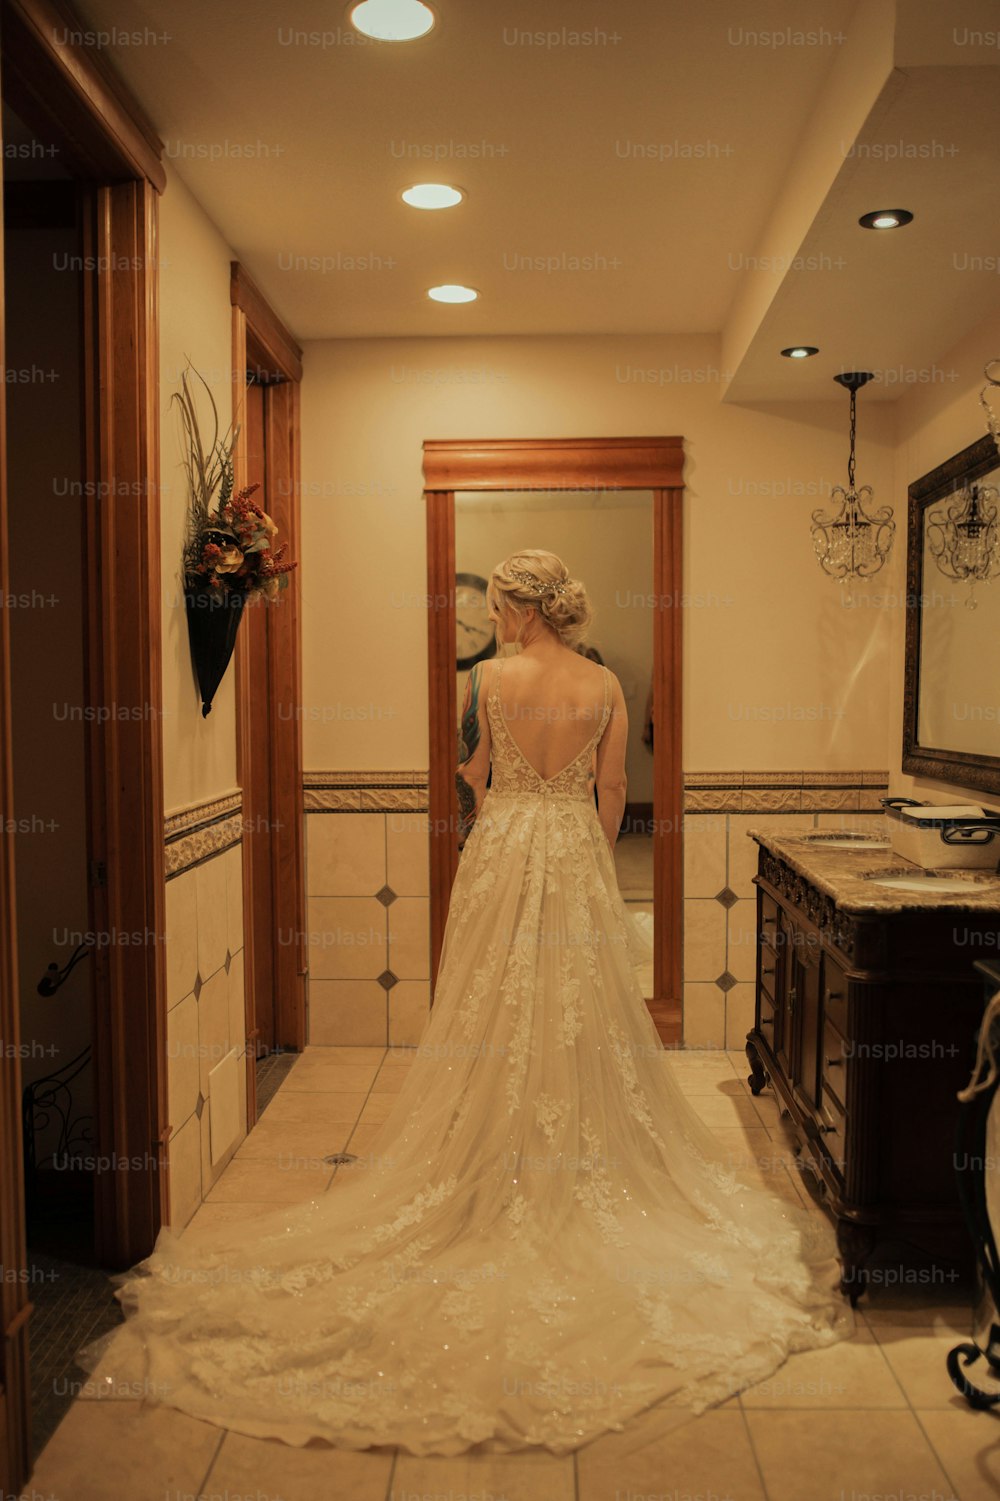 a woman in a wedding dress standing in front of a mirror